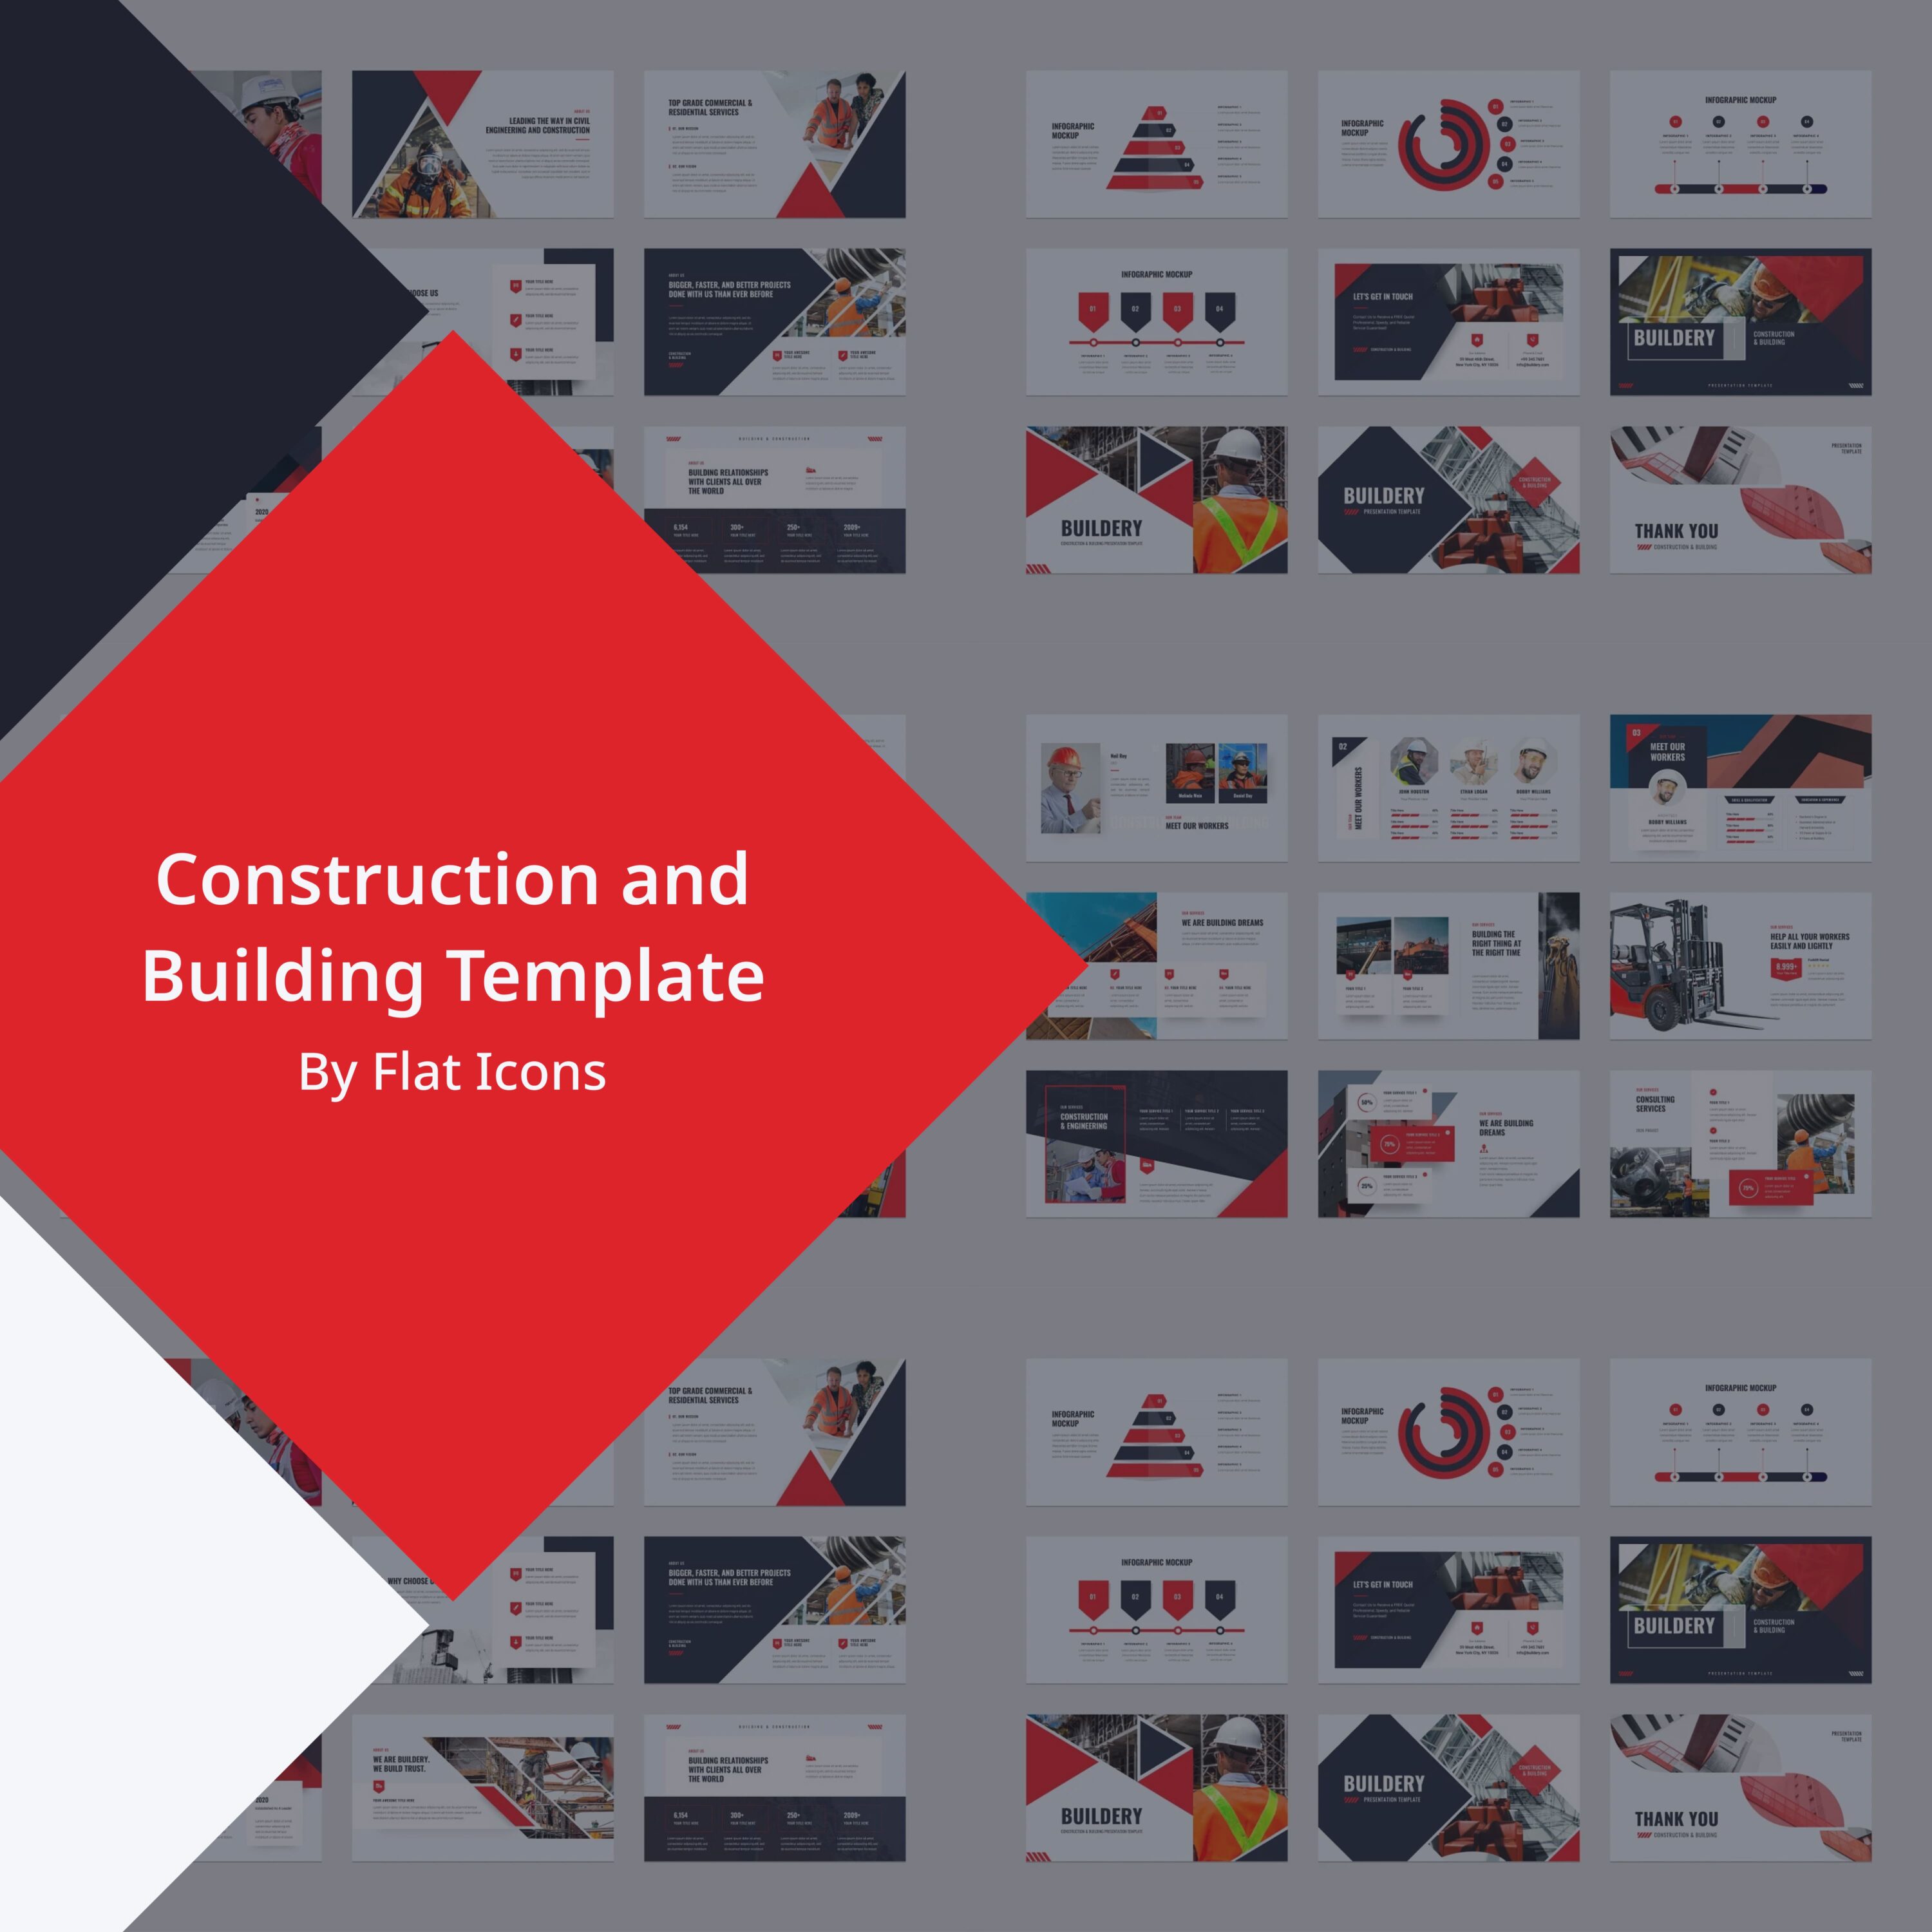 Construction and Building Template.